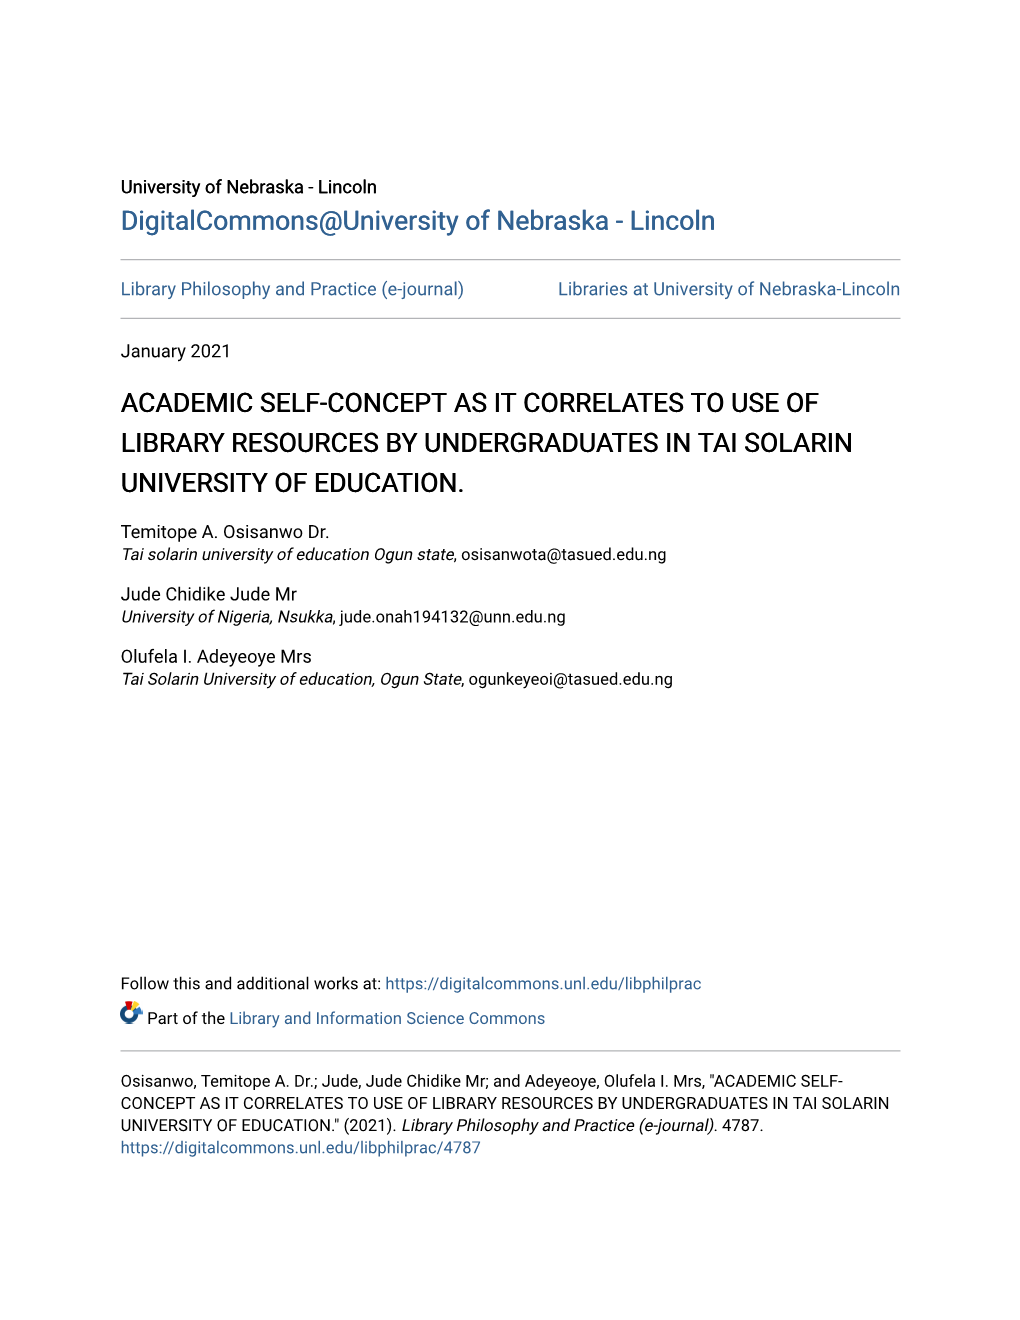 Academic Self-Concept As It Correlates to Use of Library Resources by Undergraduates in Tai Solarin University of Education